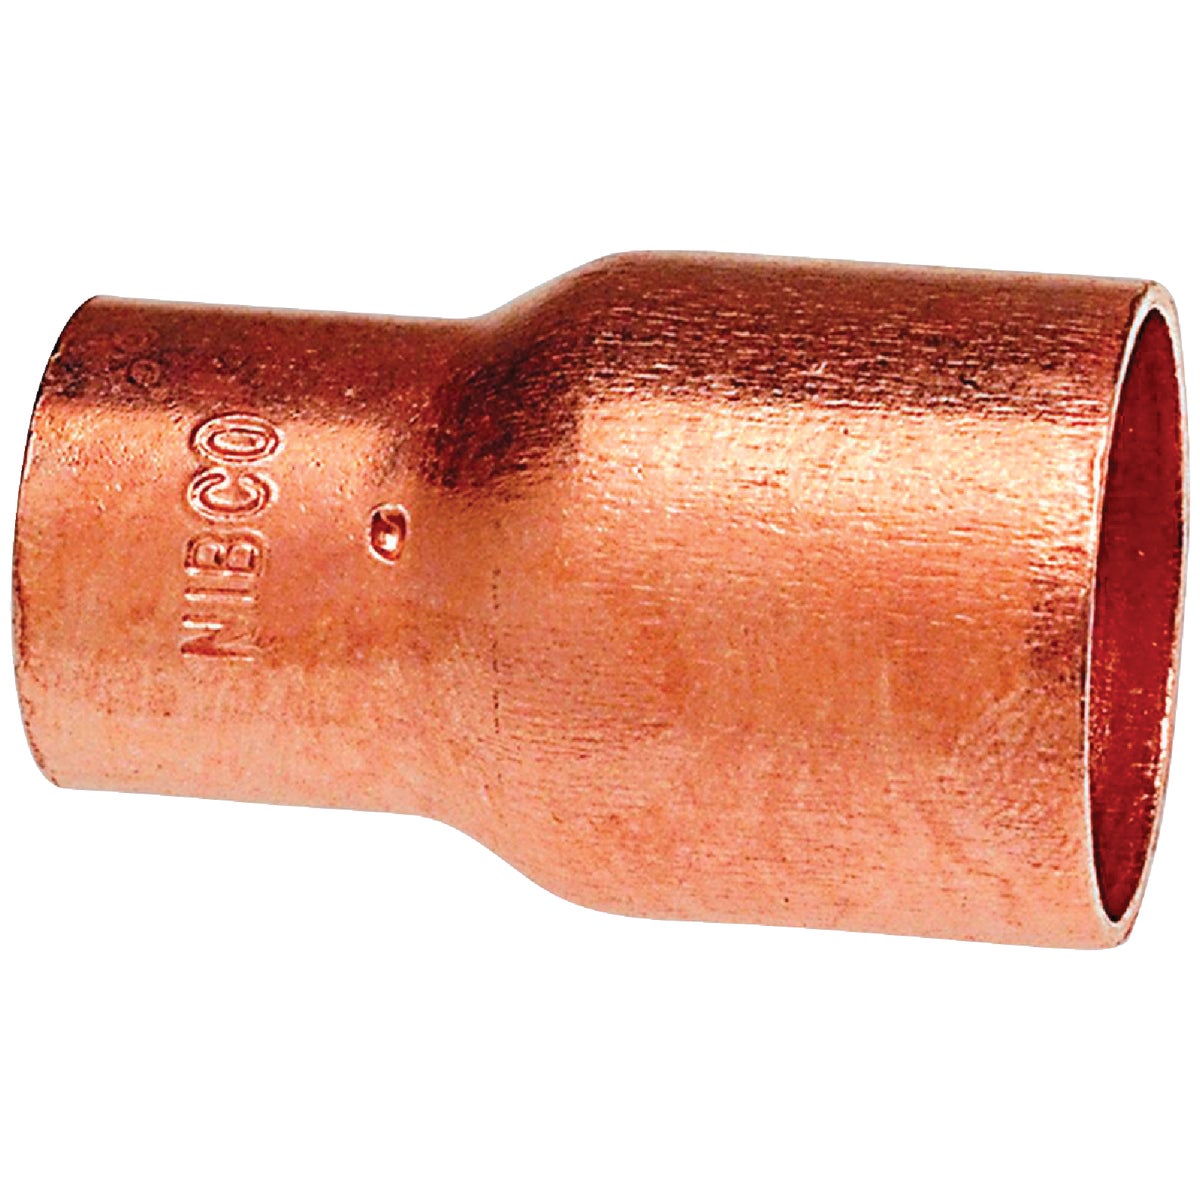 Item 442211, Coupling is copper to copper with stop.